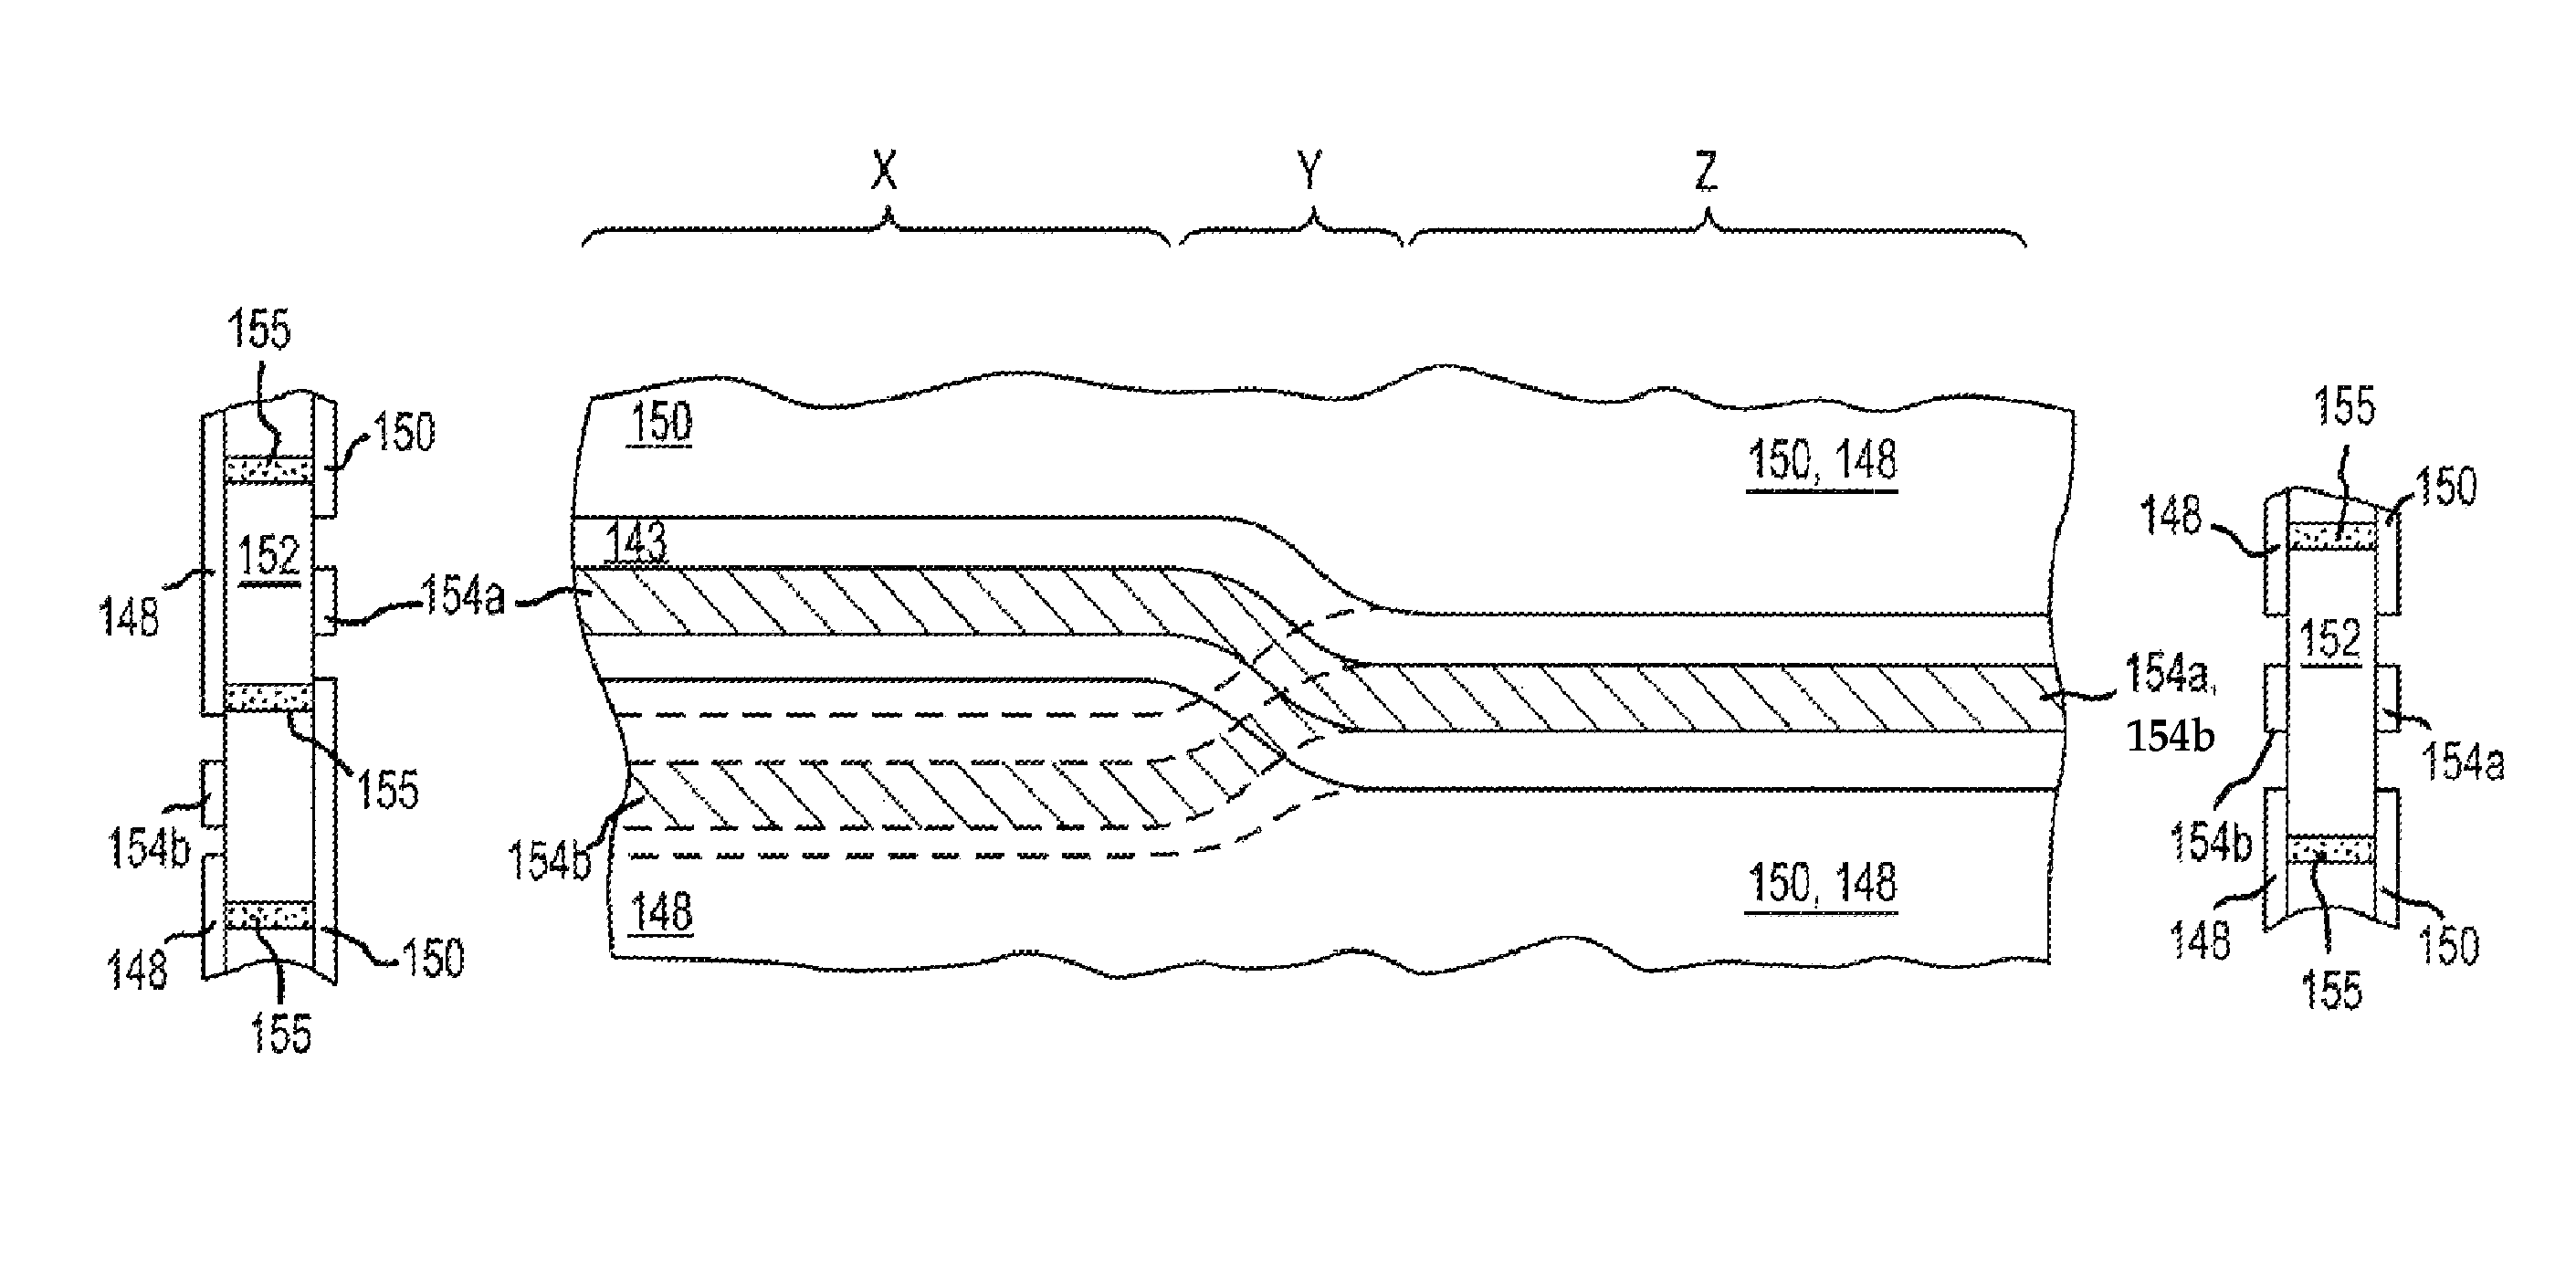 Flexible interconnect cable having signal trace pairs and ground layer pairs disposed on opposite sides of a flexible dielectric